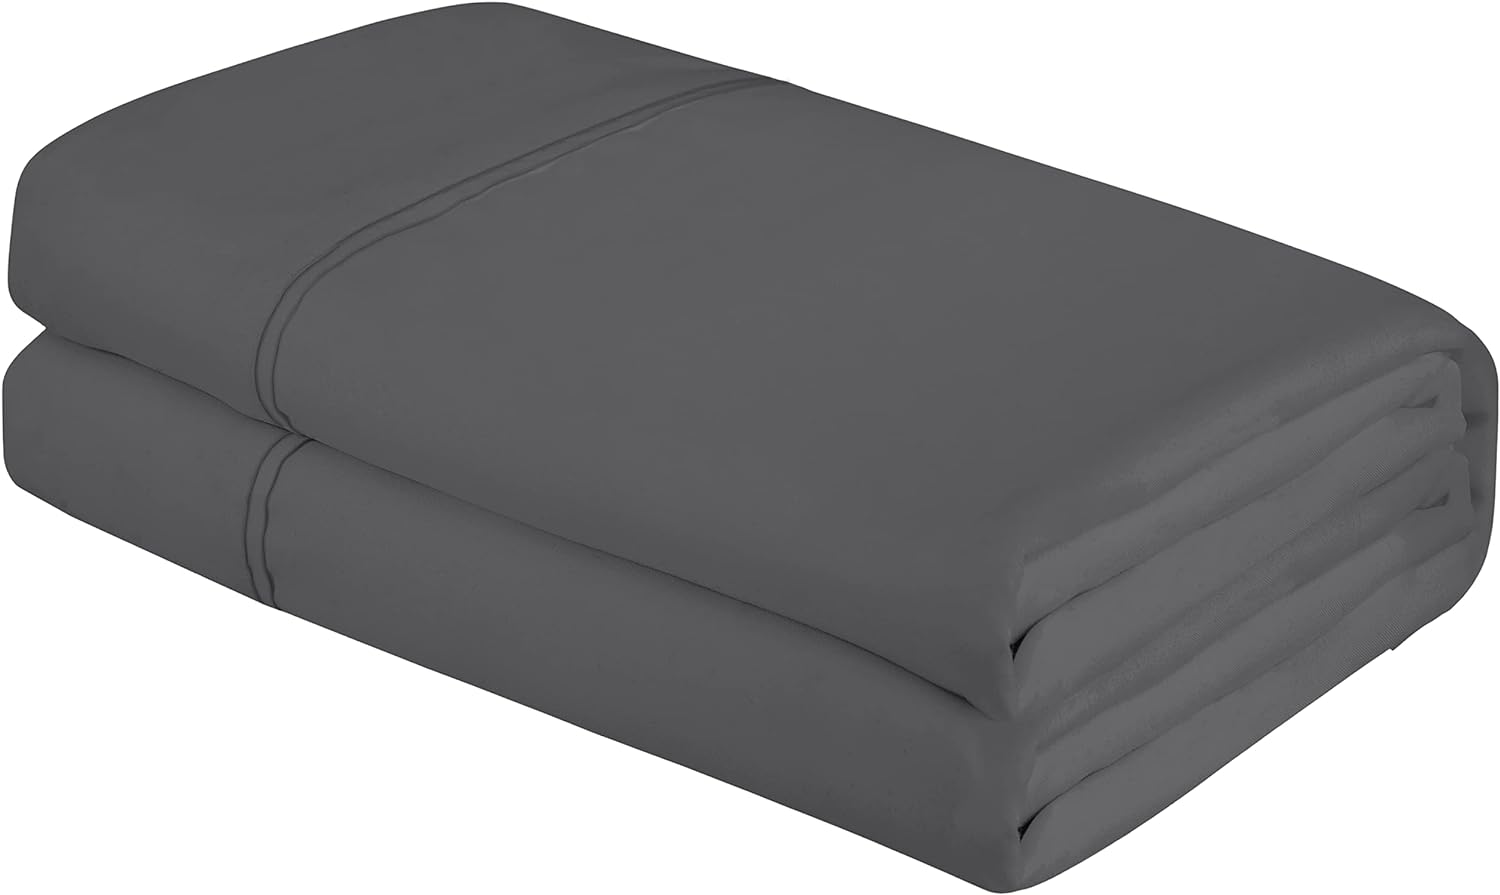 Royale Linens Queen Size Flat Sheet Only - Brushed 1800 Microfiber - Ultra Soft & Breathable - Wrinkle & Stain Resistant - Hotel Quality Flat Sheet Sold Separately - Top Sheet for Bed - (Queen, Grey)